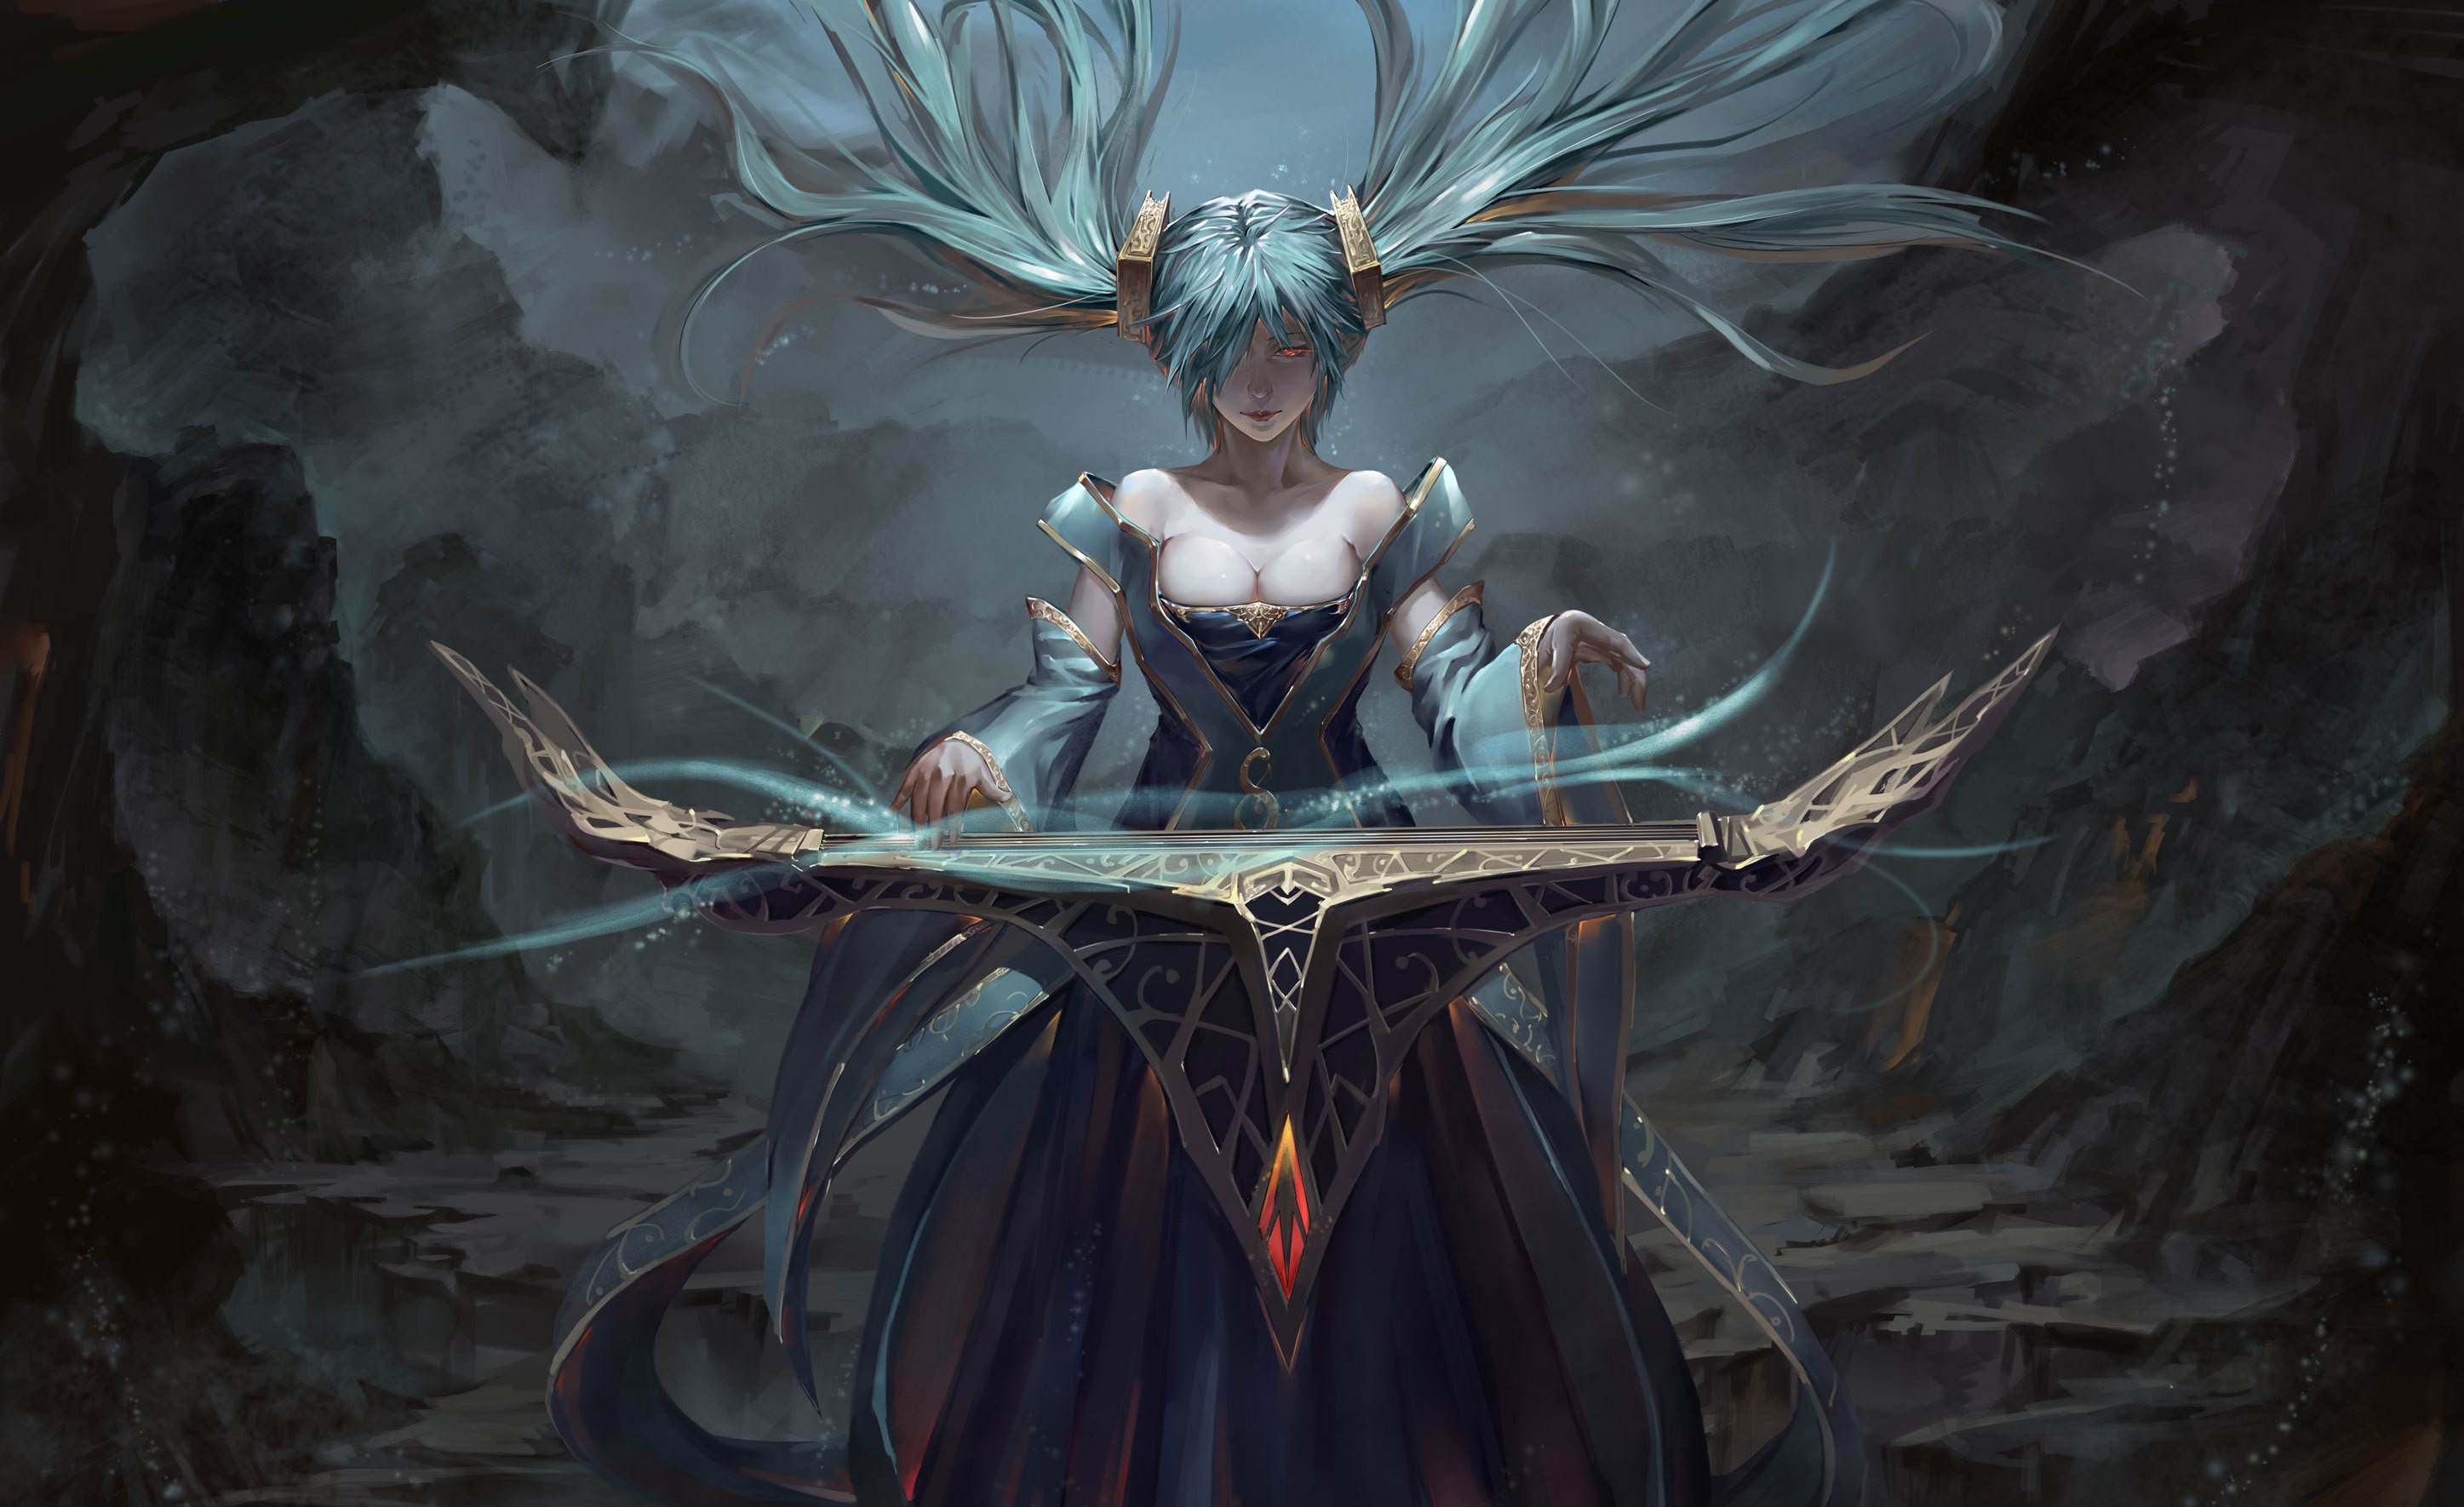 General 2894x1770 anime blue hair piano League of Legends Sona (League of Legends) cave musical instrument fantasy art video game art boobs dress cyan hair red eyes standing PC gaming video game girls